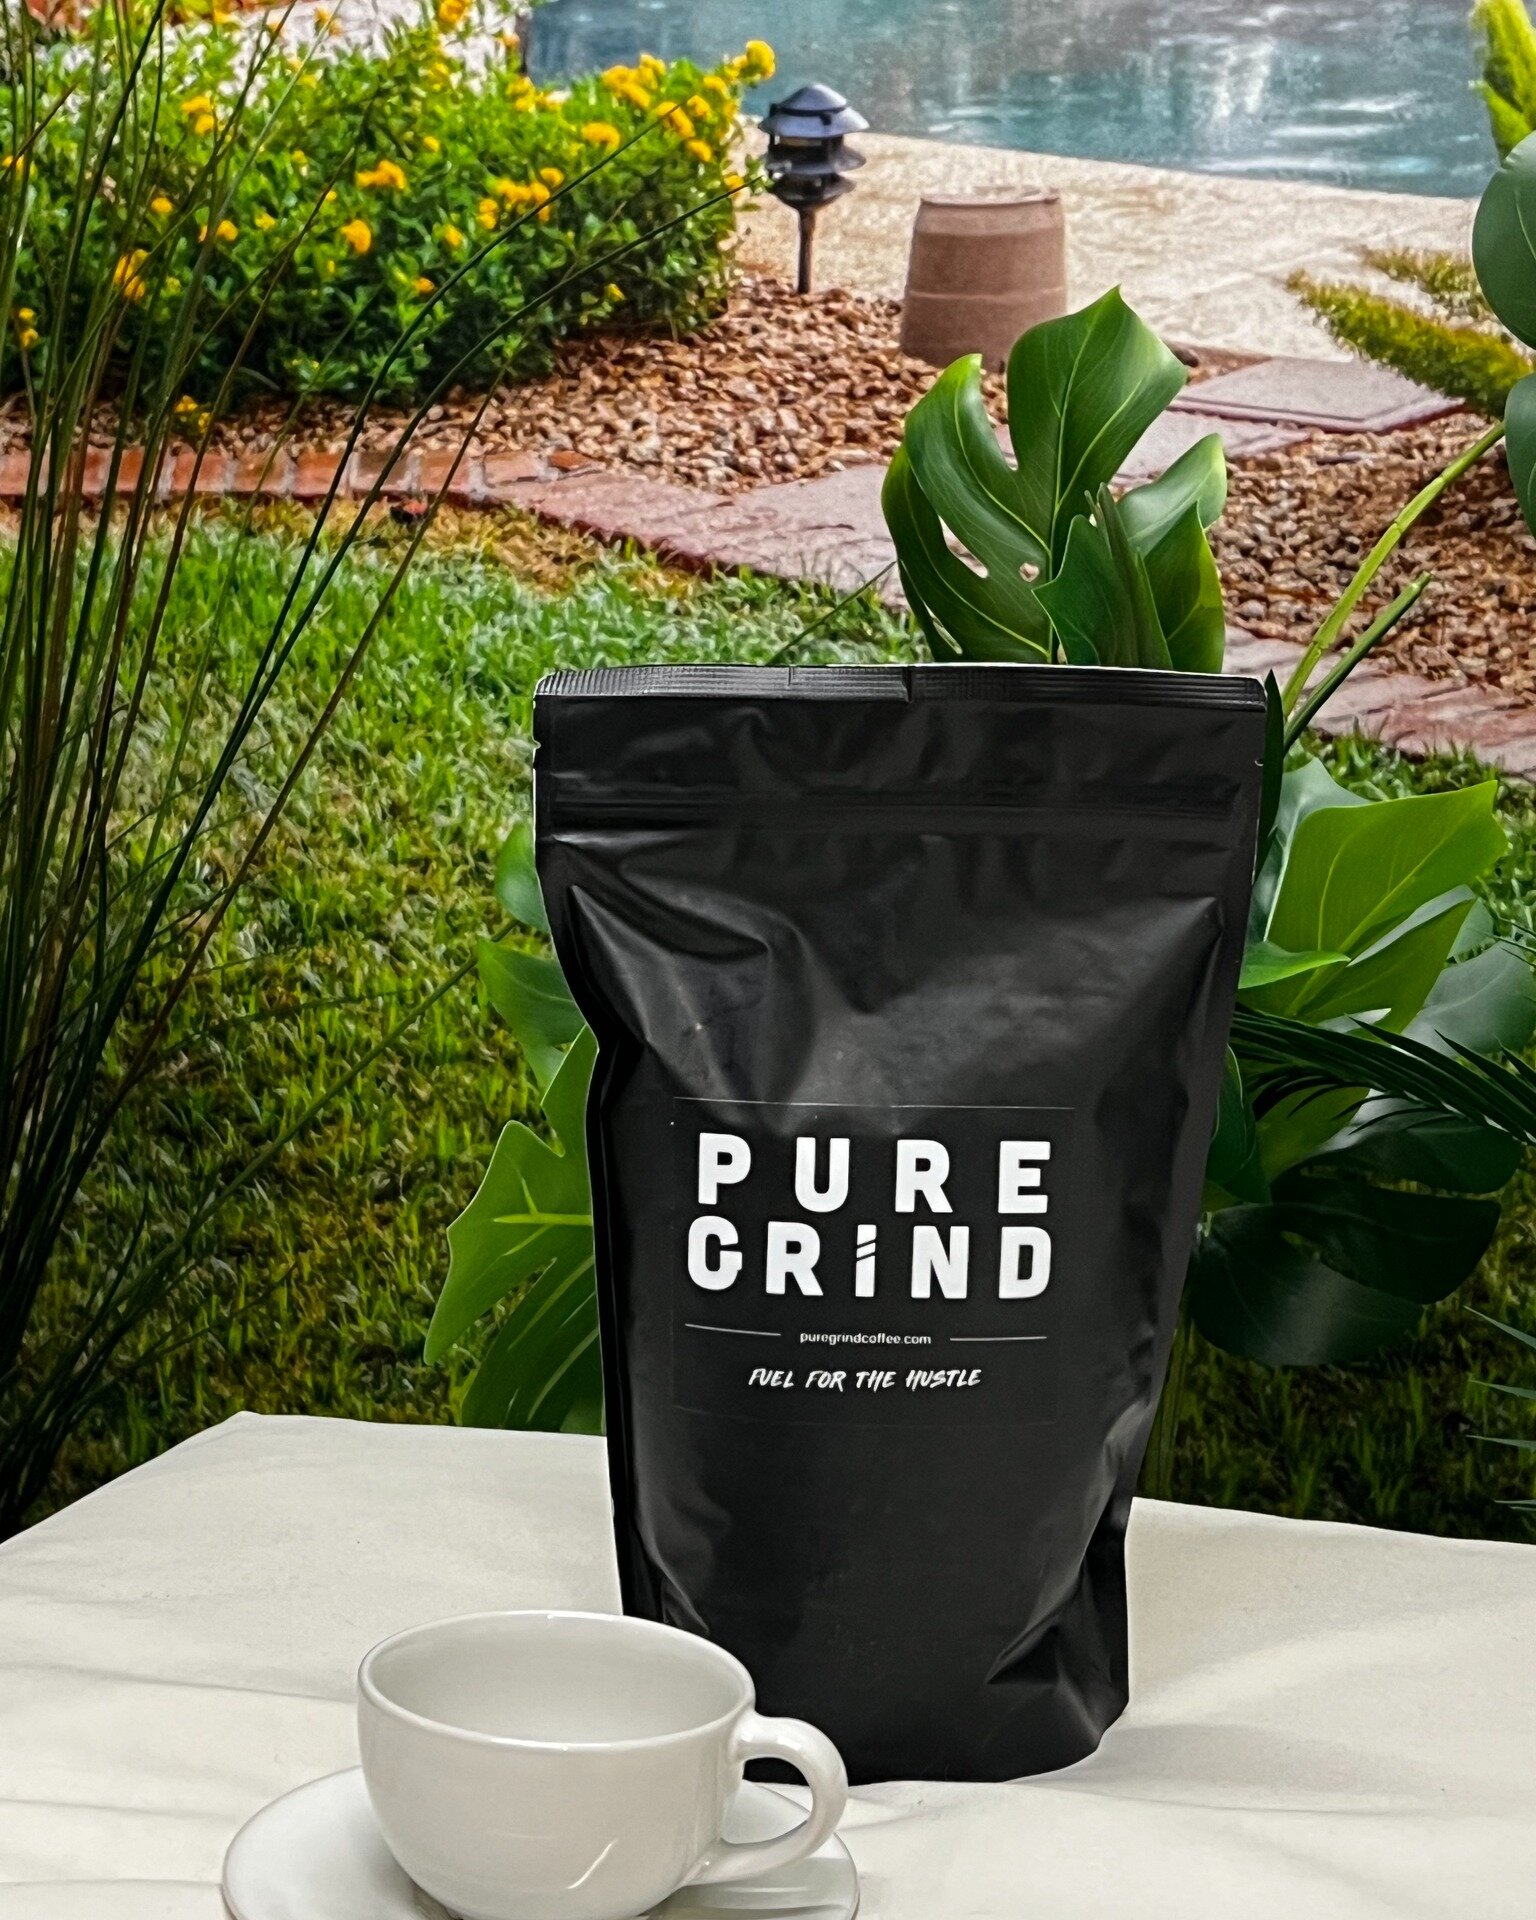 Enjoying every moment with a cup of Pure Grind Coffee by the pool, surrounded by breathtaking scenery. This is the essence of life! 🏞️ 

#PureLife #PureGrindCoffee #EnjoyTheMoments #smallbatchroaster #coffee